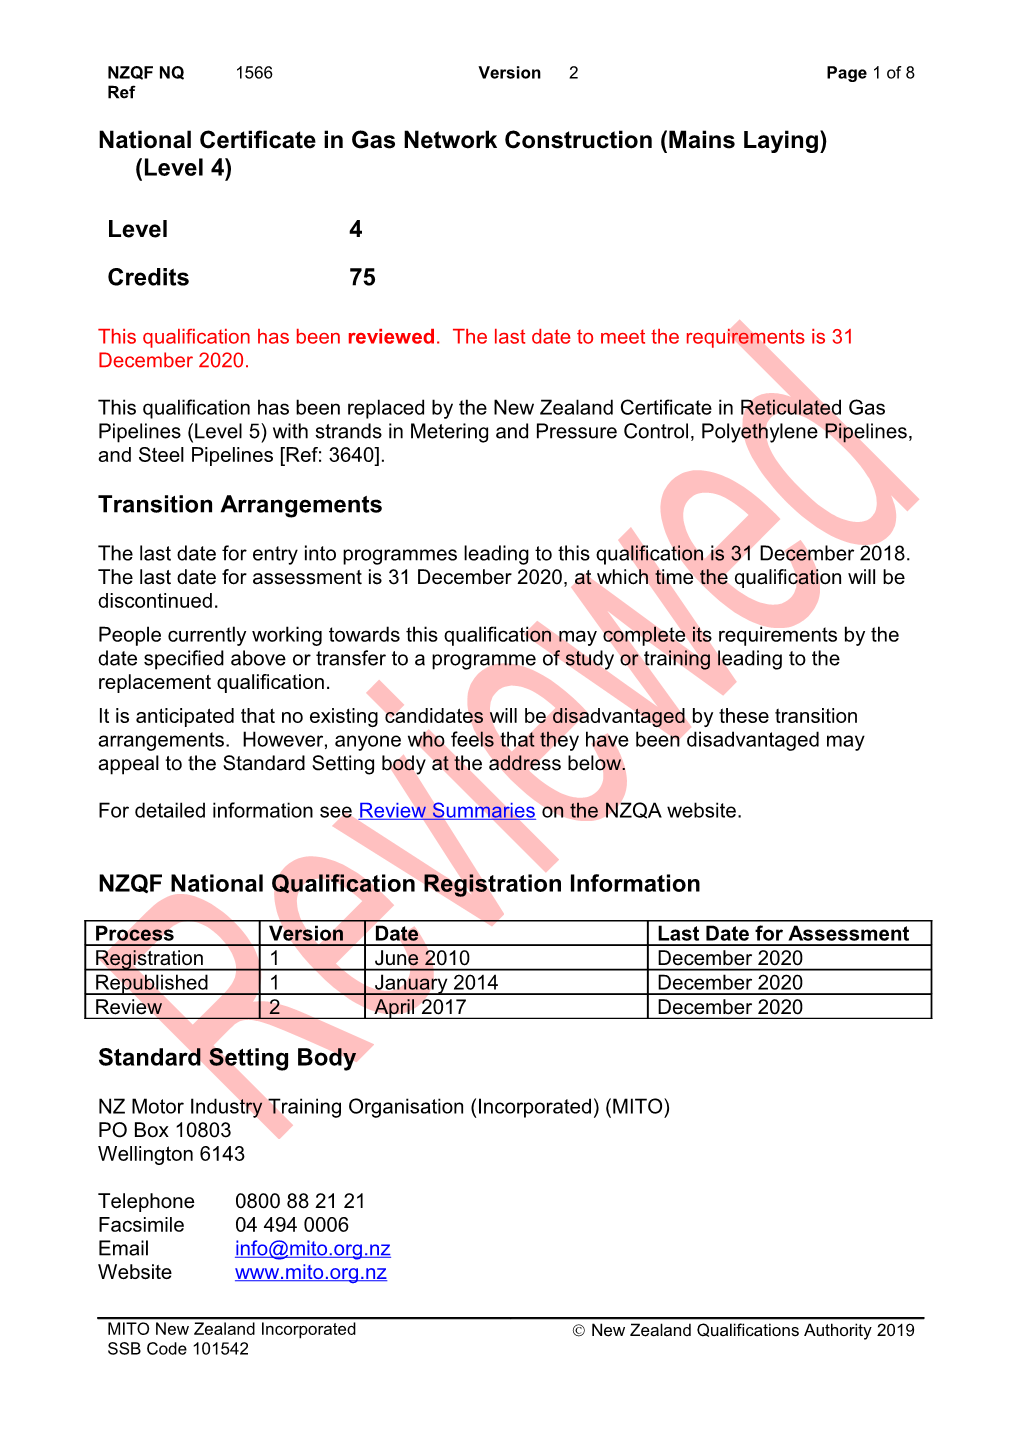 1566 National Certificate in Gas Network Construction (Mains Laying) (Level 4)